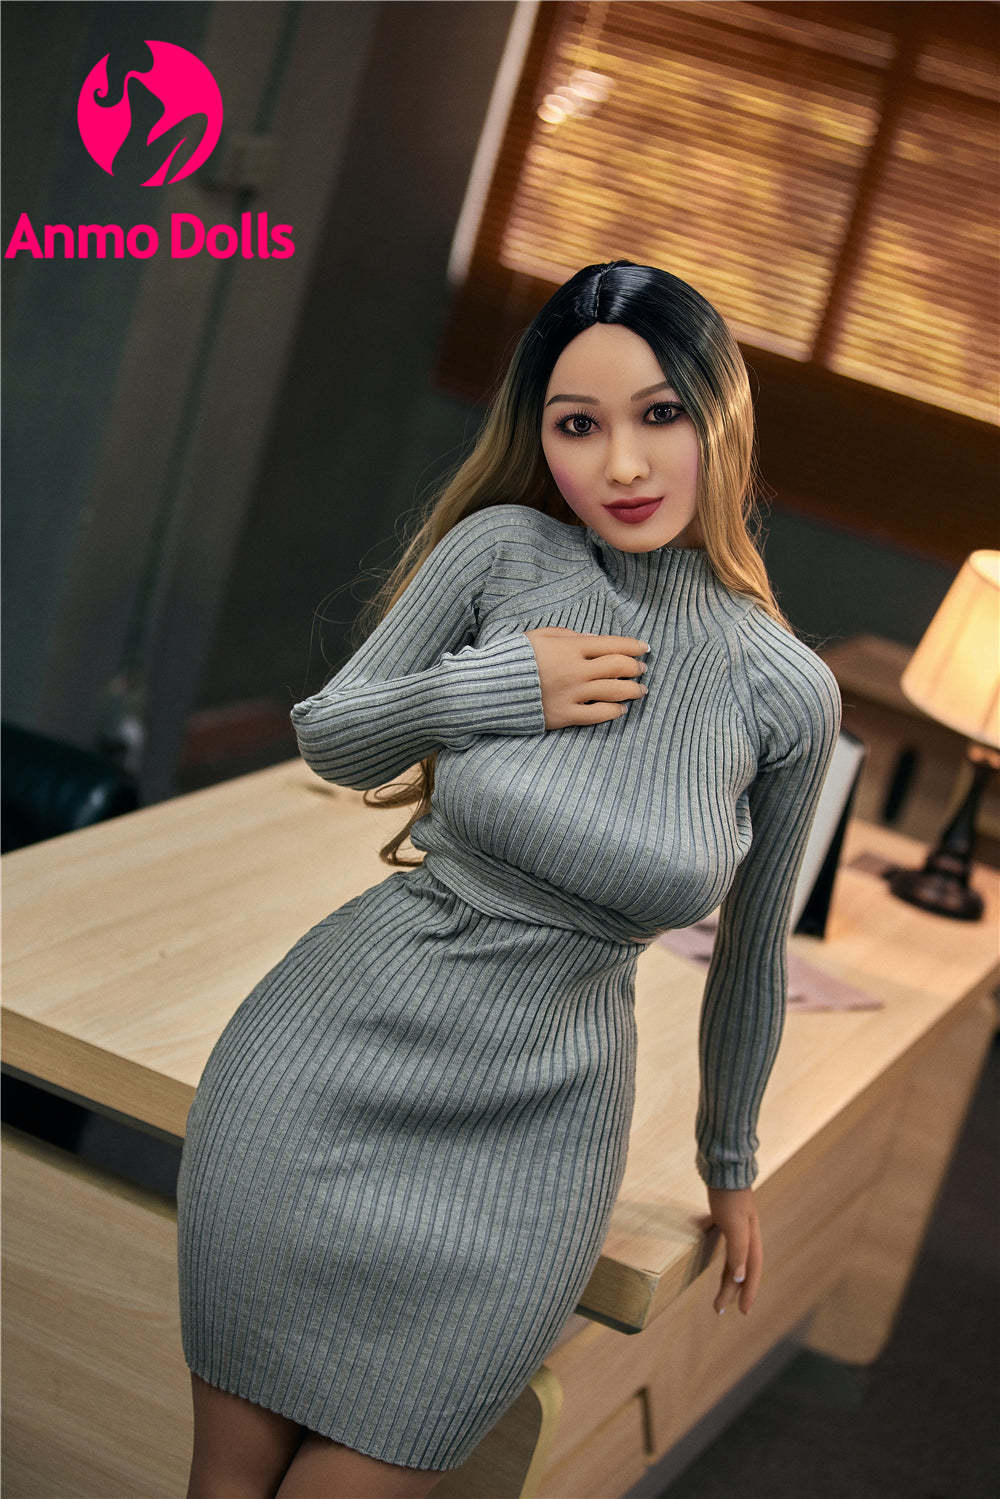 Yumina - The Horney Office Manager Sex Doll - TPE Sex doll by Anmodolls